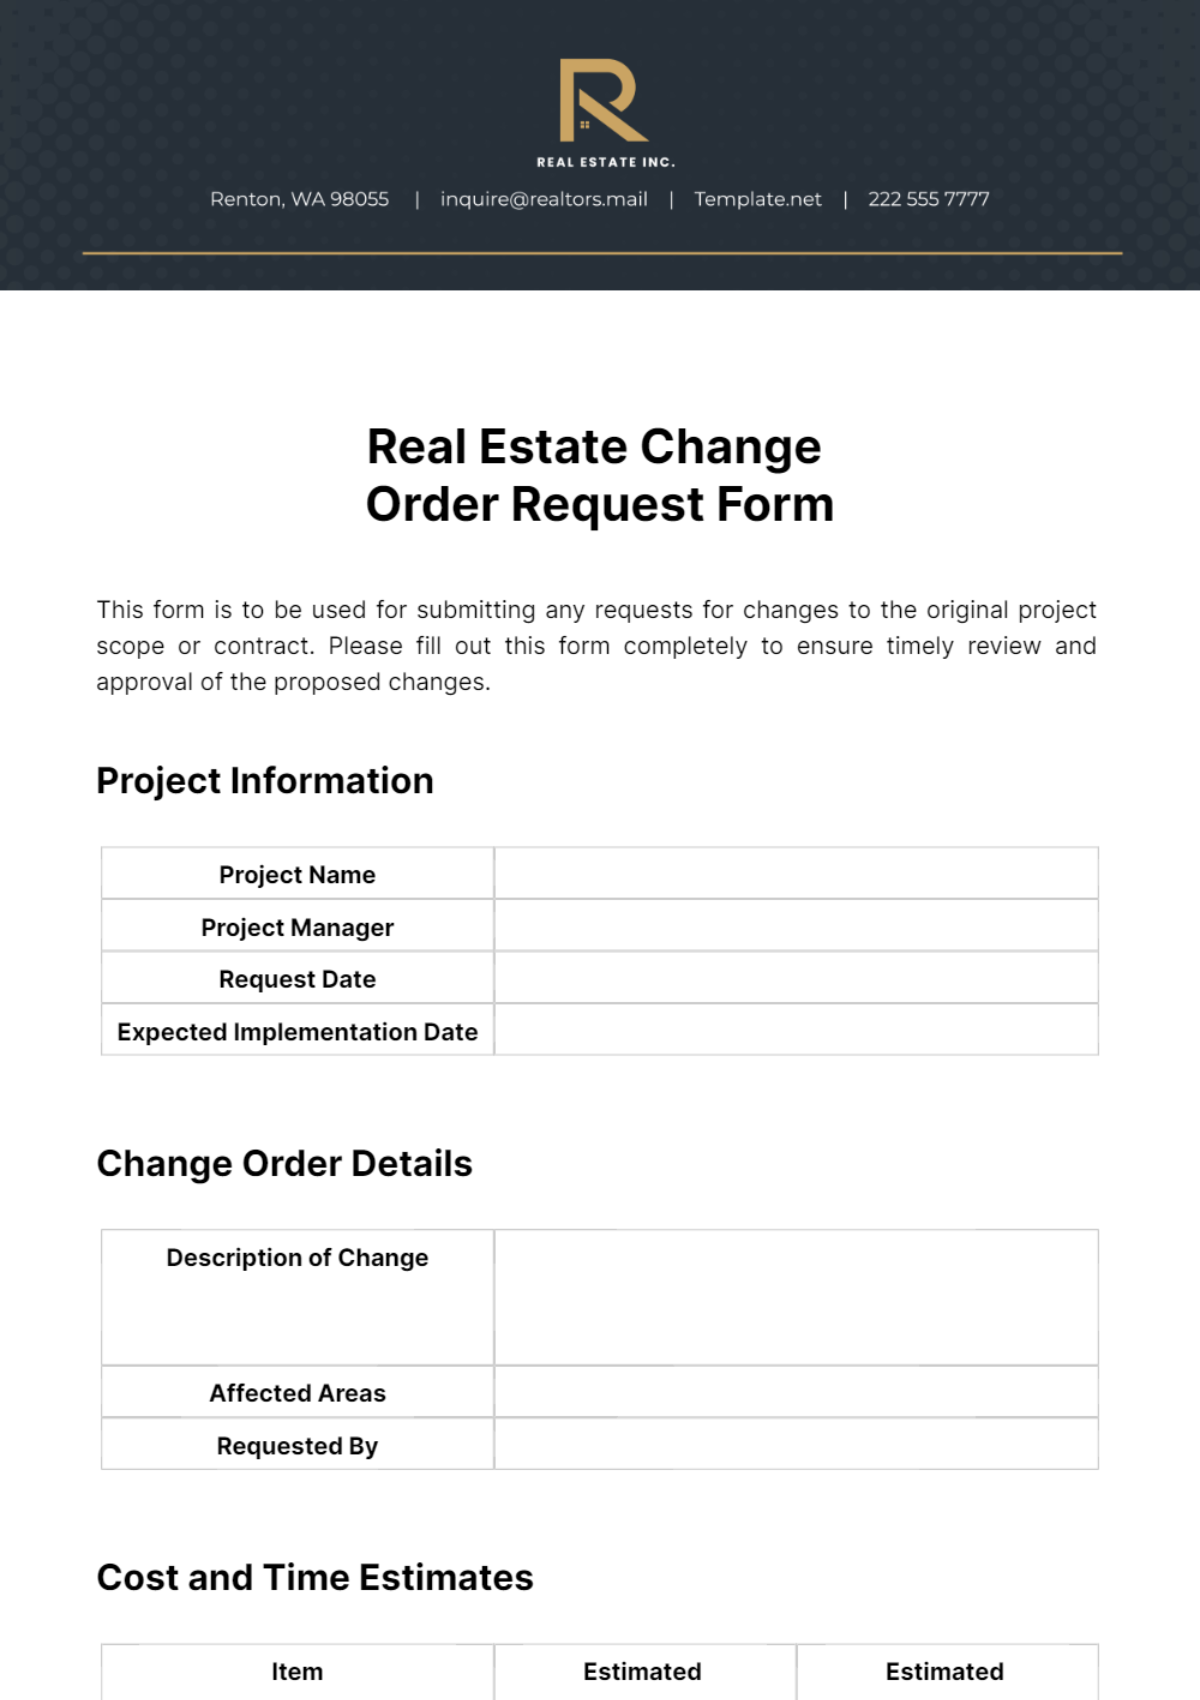 Real Estate Change Order Request Form Template